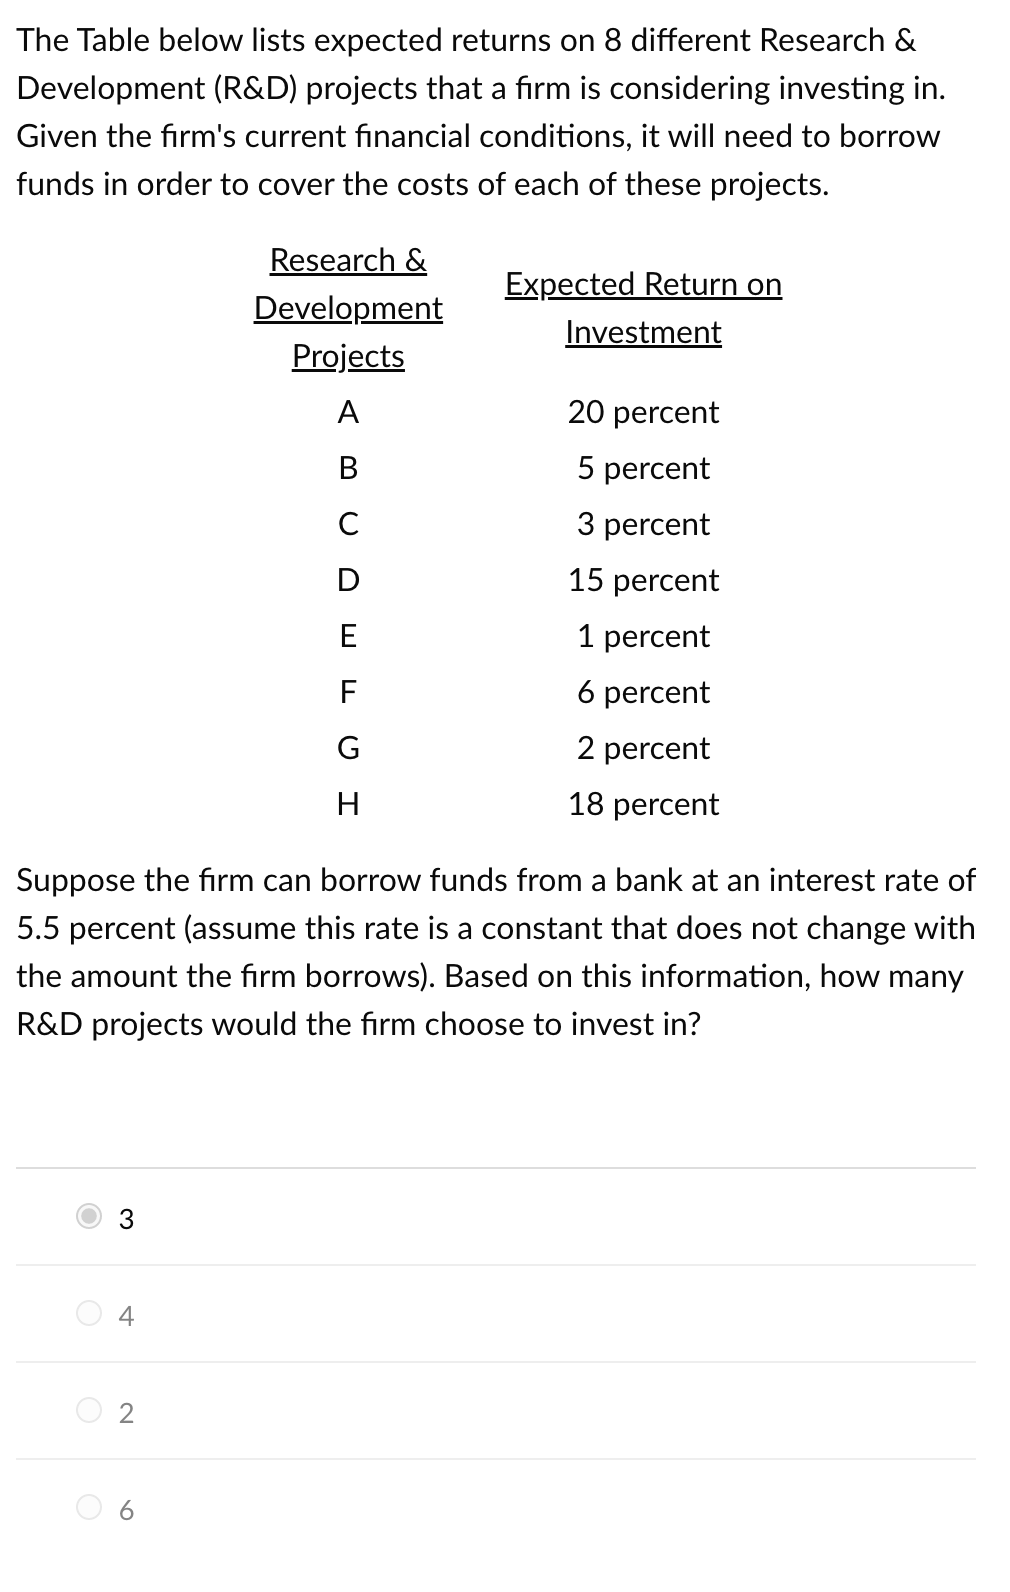 The Table below lists expected returns on 8 different Research &
Development (R&D) projects that a firm is considering investing in.
Given the firm's current financial conditions, it will need to borrow
funds in order to cover the costs of each of these projects.
O
O
3
4
Suppose the firm can borrow funds from a bank at an interest rate of
5.5 percent (assume this rate is a constant that does not change with
the amount the firm borrows). Based on this information, how many
R&D projects would the firm choose to invest in?
2
Research &
Development
Projects
A
B
C
D
E
a
F G H
G
Expected Return on
Investment
20 percent
5 percent
3 percent
15 percent
1 percent
6 percent
2 percent
18 percent